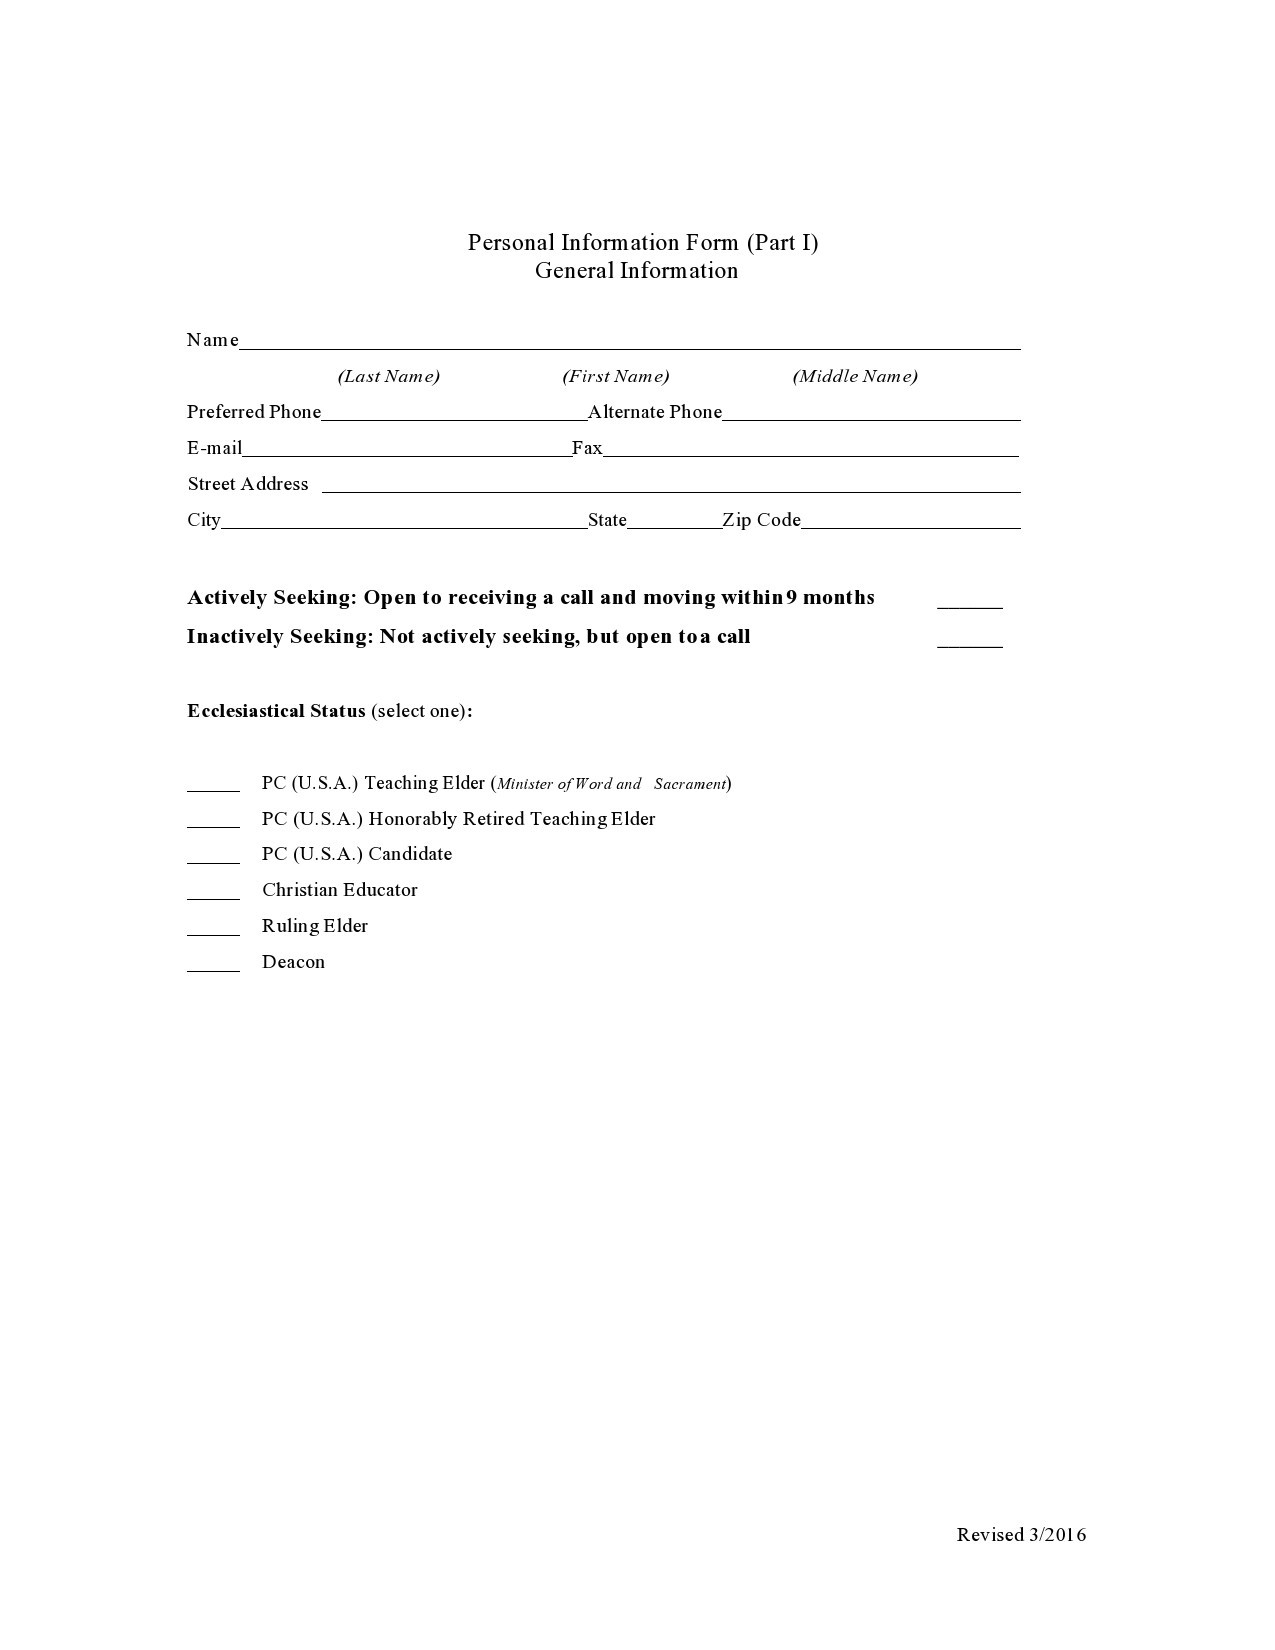 Free personal information form 17